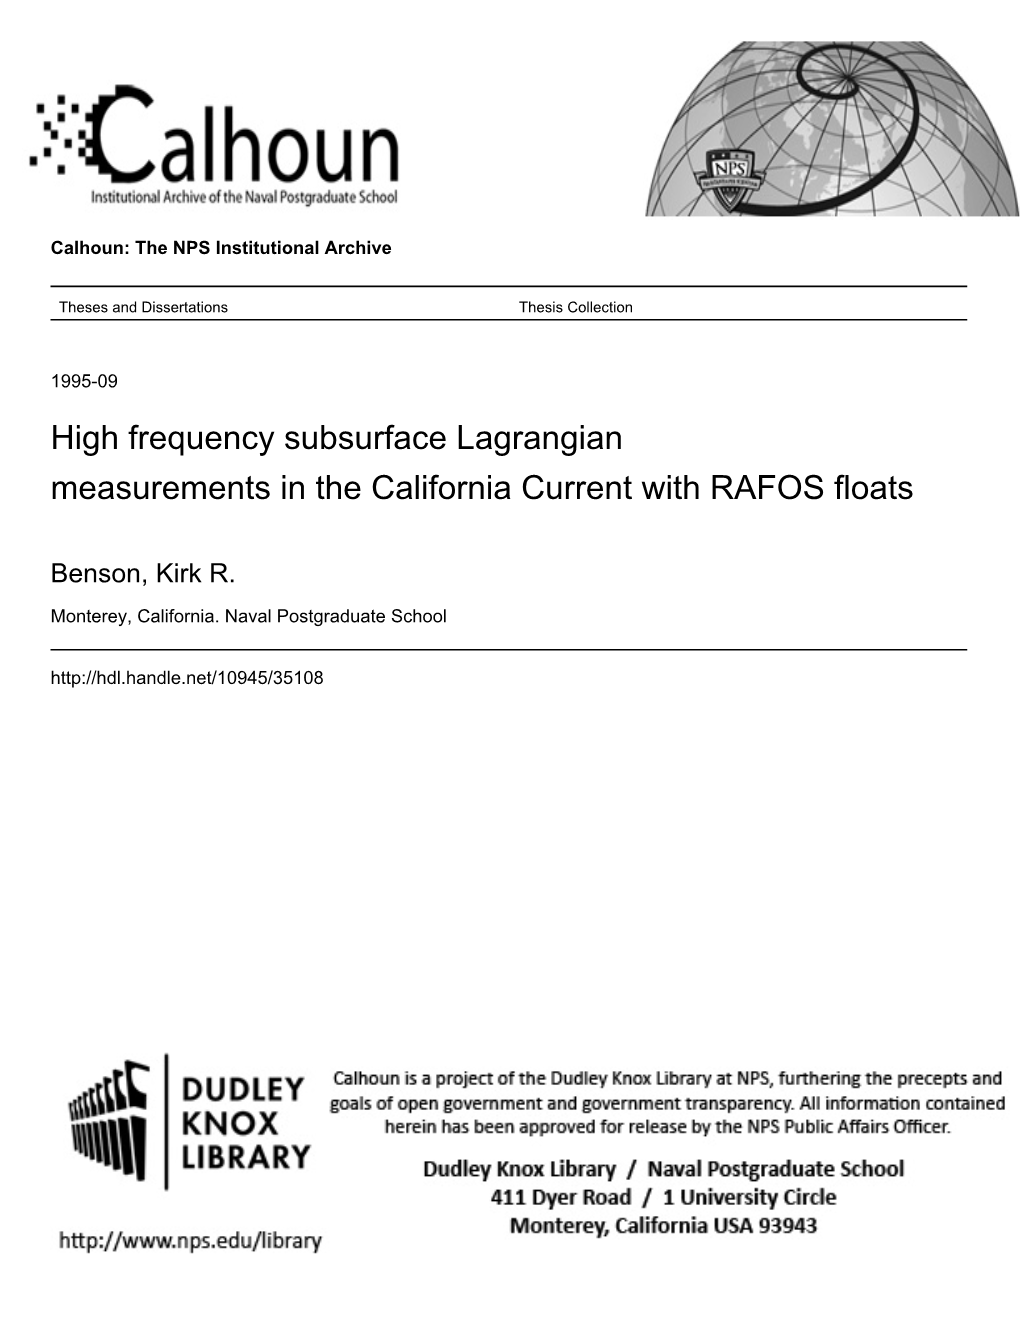 High Frequency Subsurface Lagrangian Measurements in the California Current with RAFOS Floats